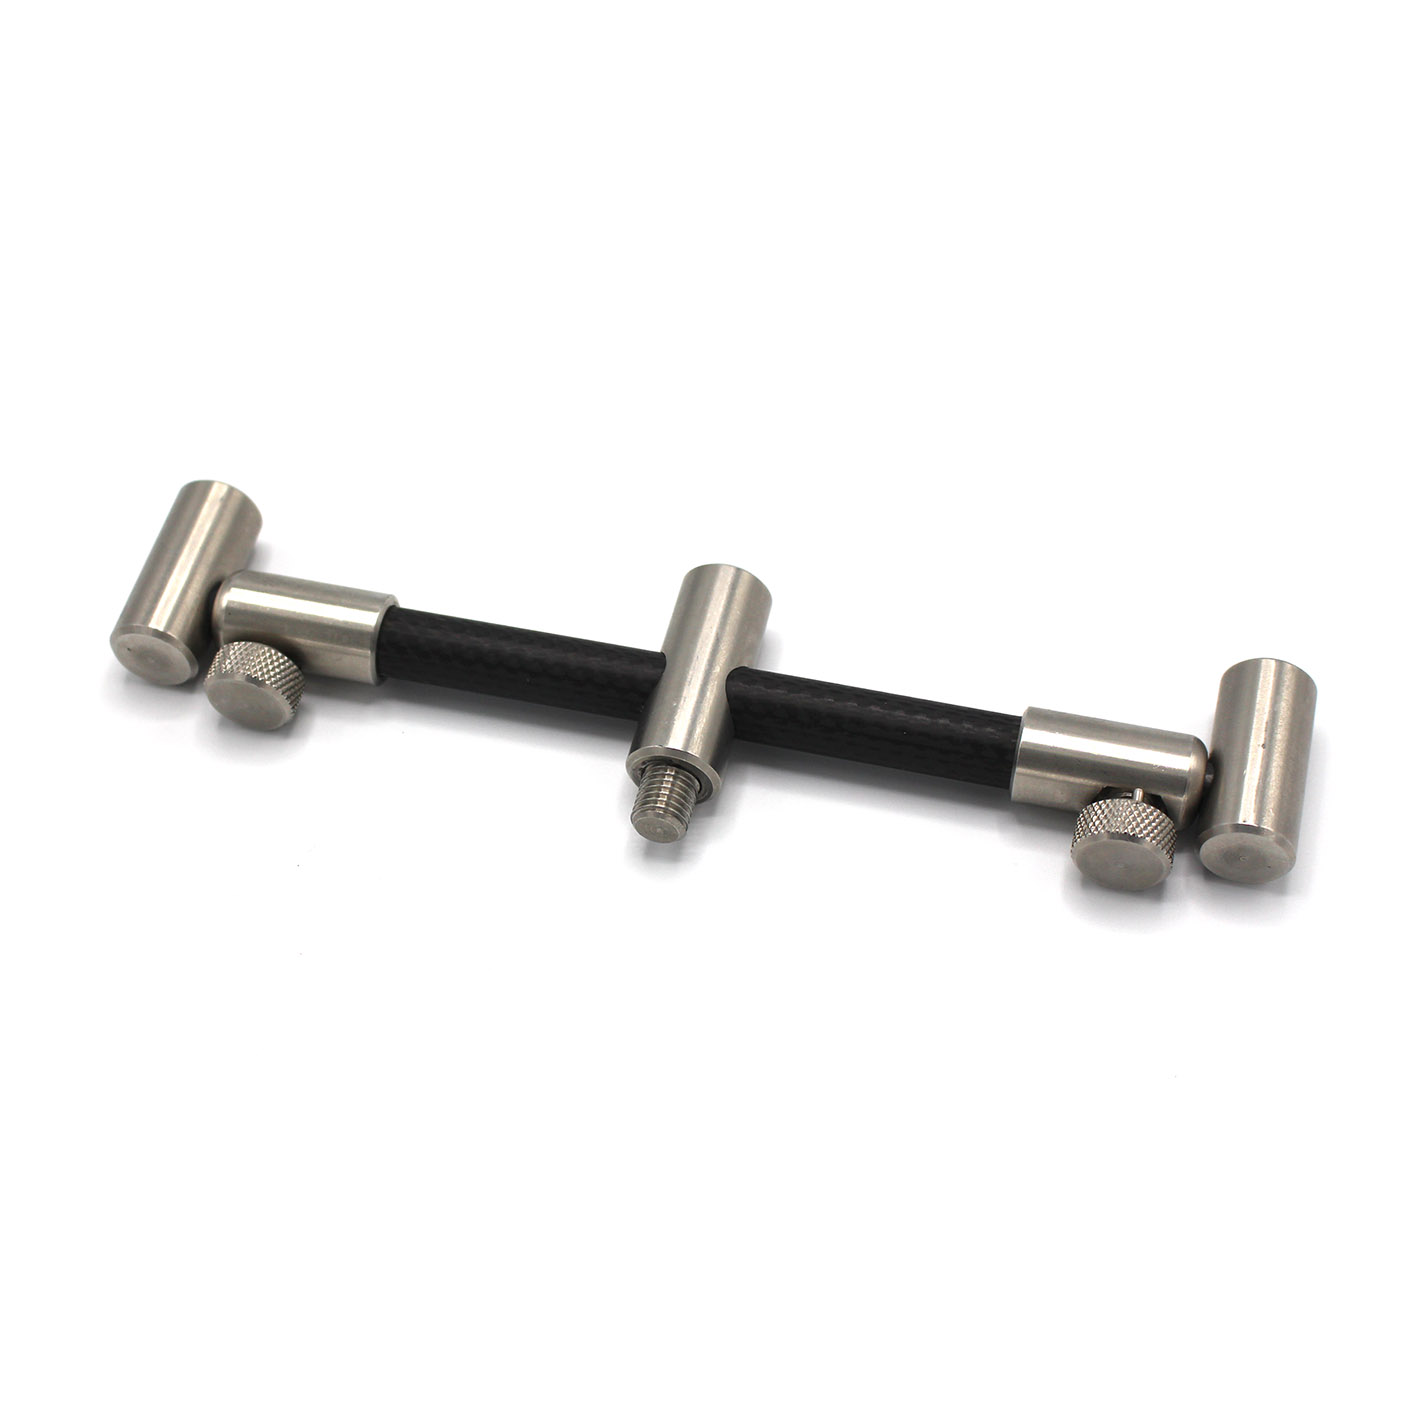 Stainless Carbon 3 Rod Adjustable Buzzer Bar